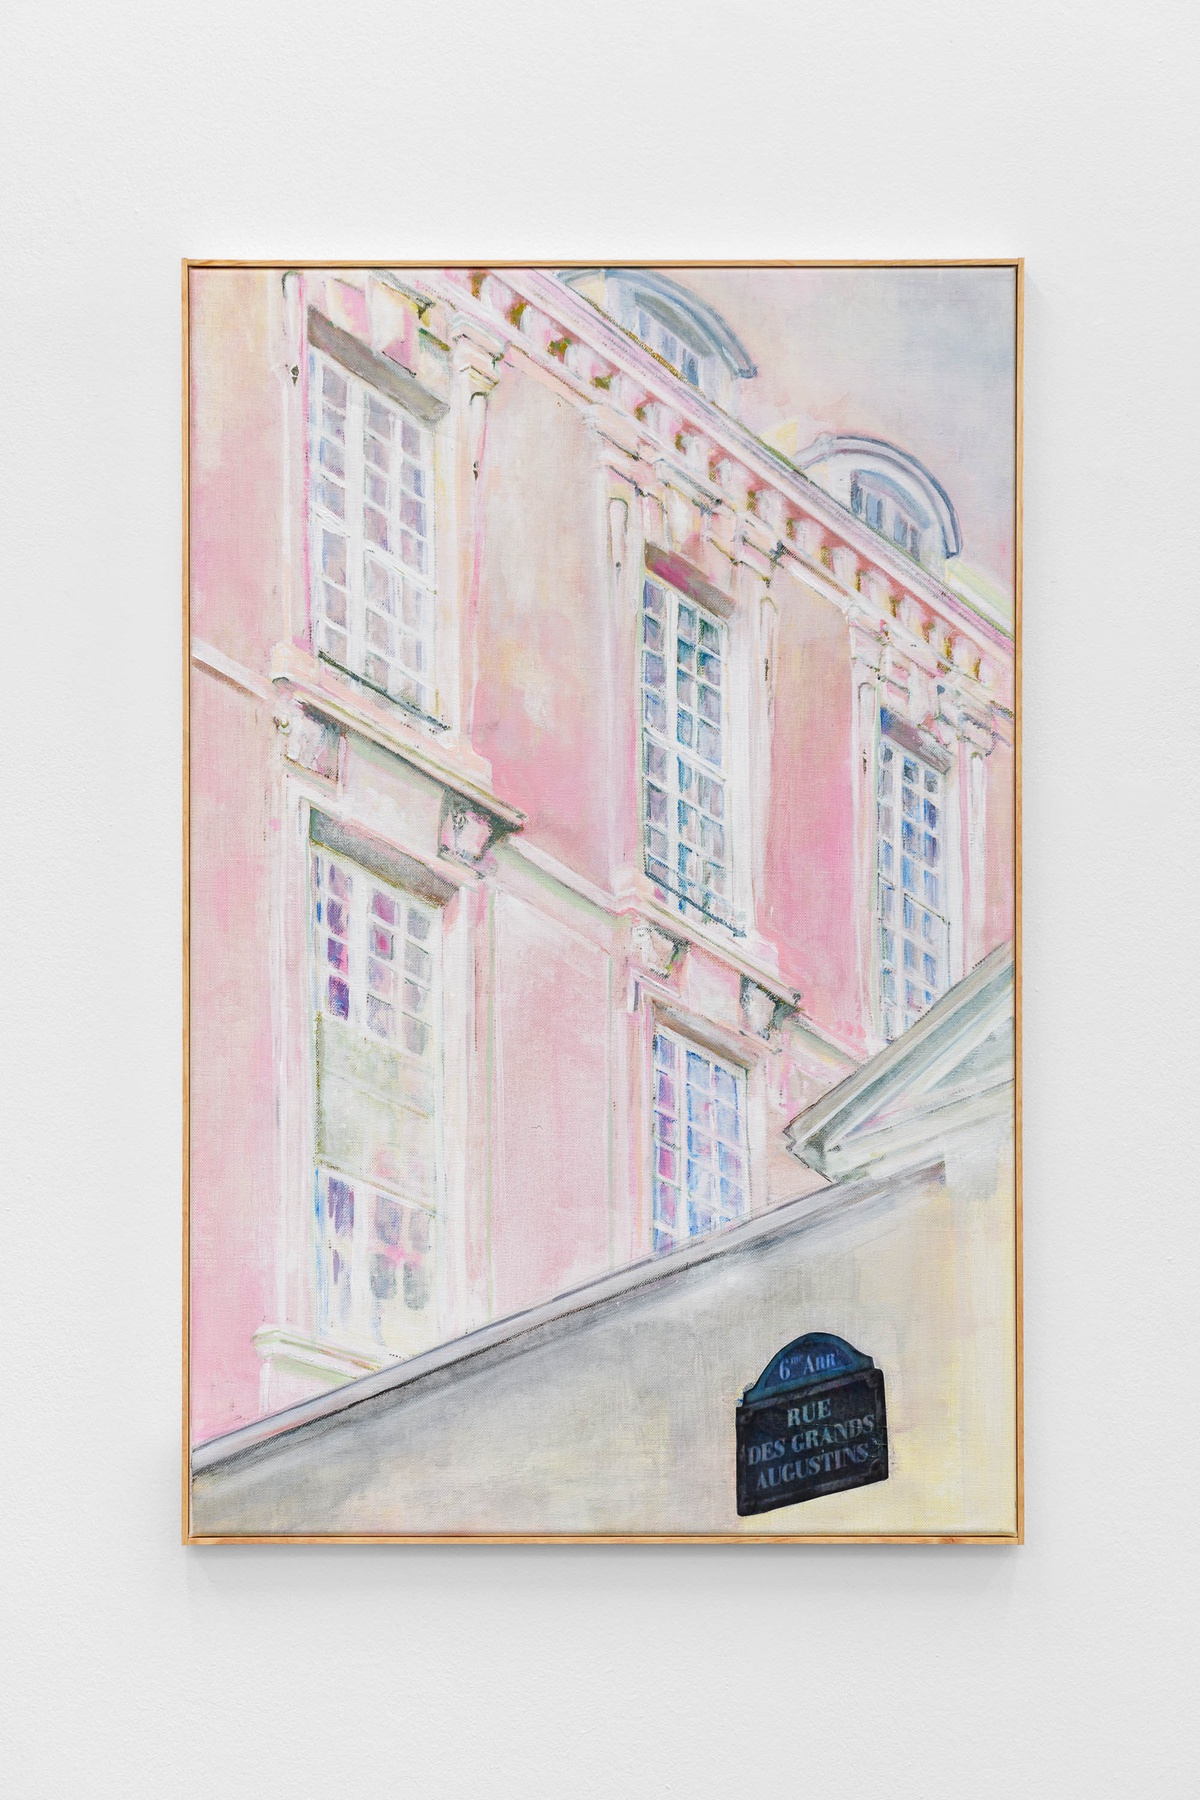 Ariane Mueller, 7 rue de Grand Augustins 3, 2023acrylic and paper on canvas, artist made frame100 x 65 cm